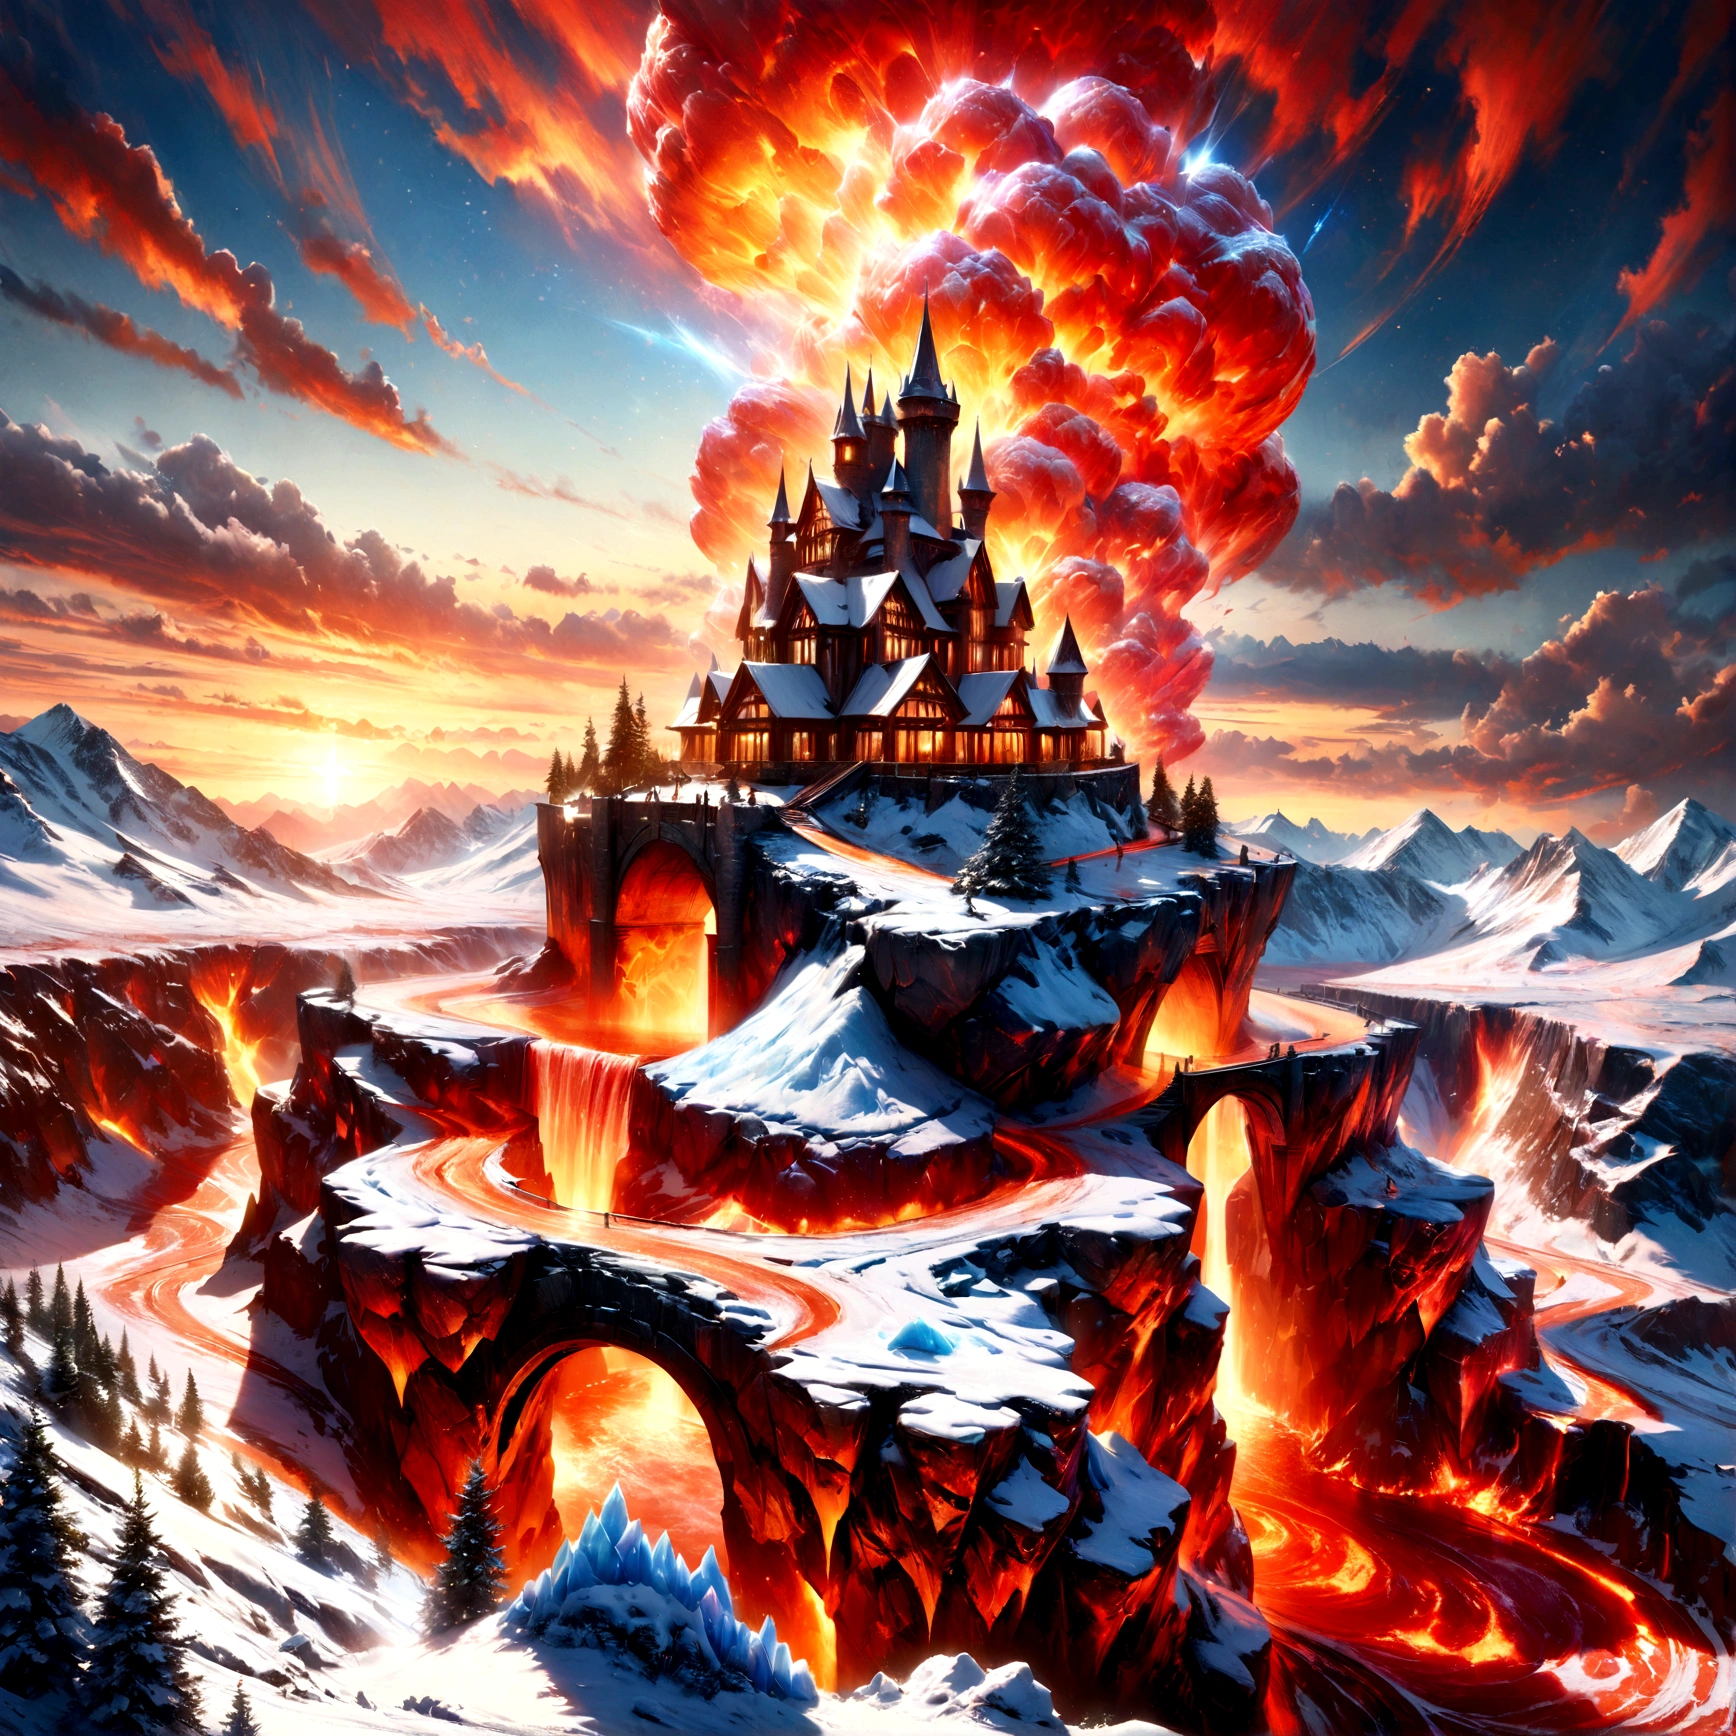 a panoramic award winning photography, Photorealistic, extremely detailed of a ((castle: 1.5)) made from (ice: 1.3), standing on the peak of a snowy mountain, an impressive best detailed castle made from ice (Photorealistic, extremely detailed), with towers, bridges, a moat filled with lava (Photorealistic, extremely detailed),  standing on top of a snowy mountain (masterpiece, extremely detailed, best quality), with pine trees, sunset light, some clouds in the air,  alpine mountain range background, best realistic, best details, best quality, 16k, [ultra detailed], masterpiece, best quality, (extremely detailed), ultra wide shot, photorealism, depth of field, faize, raging nebula